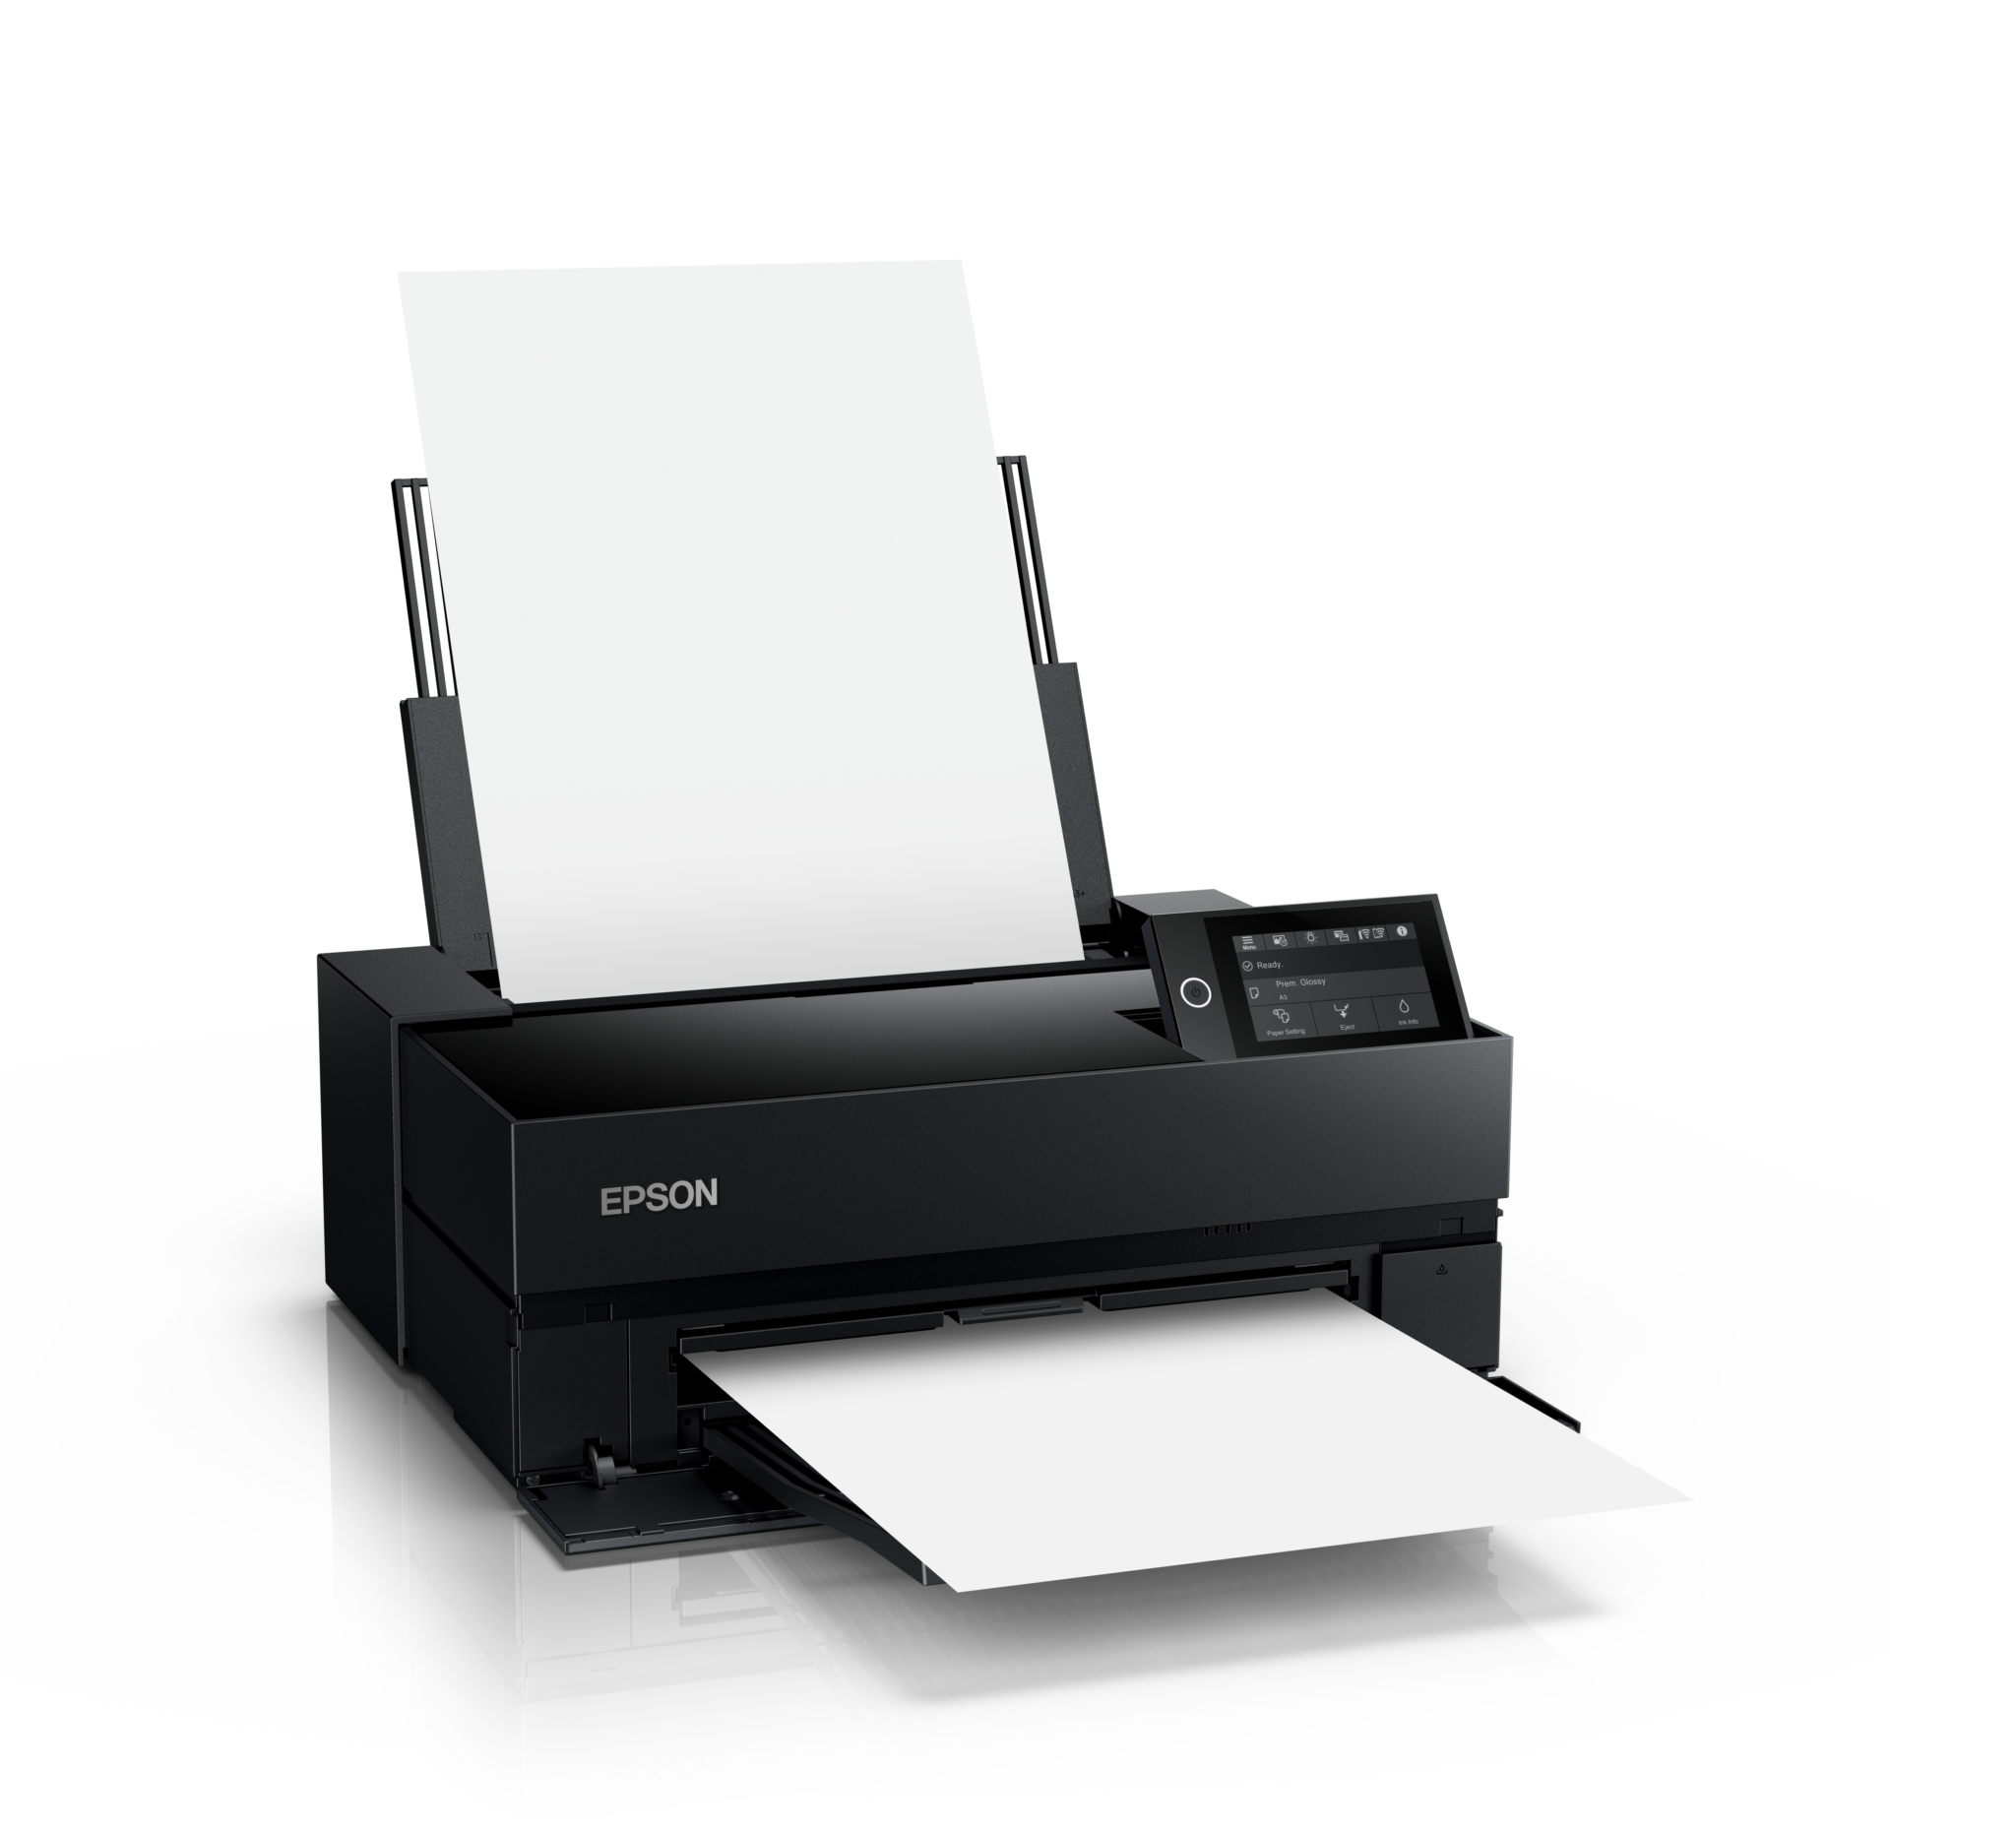 epson-surecolor-p700-review-2022-adam-withated84